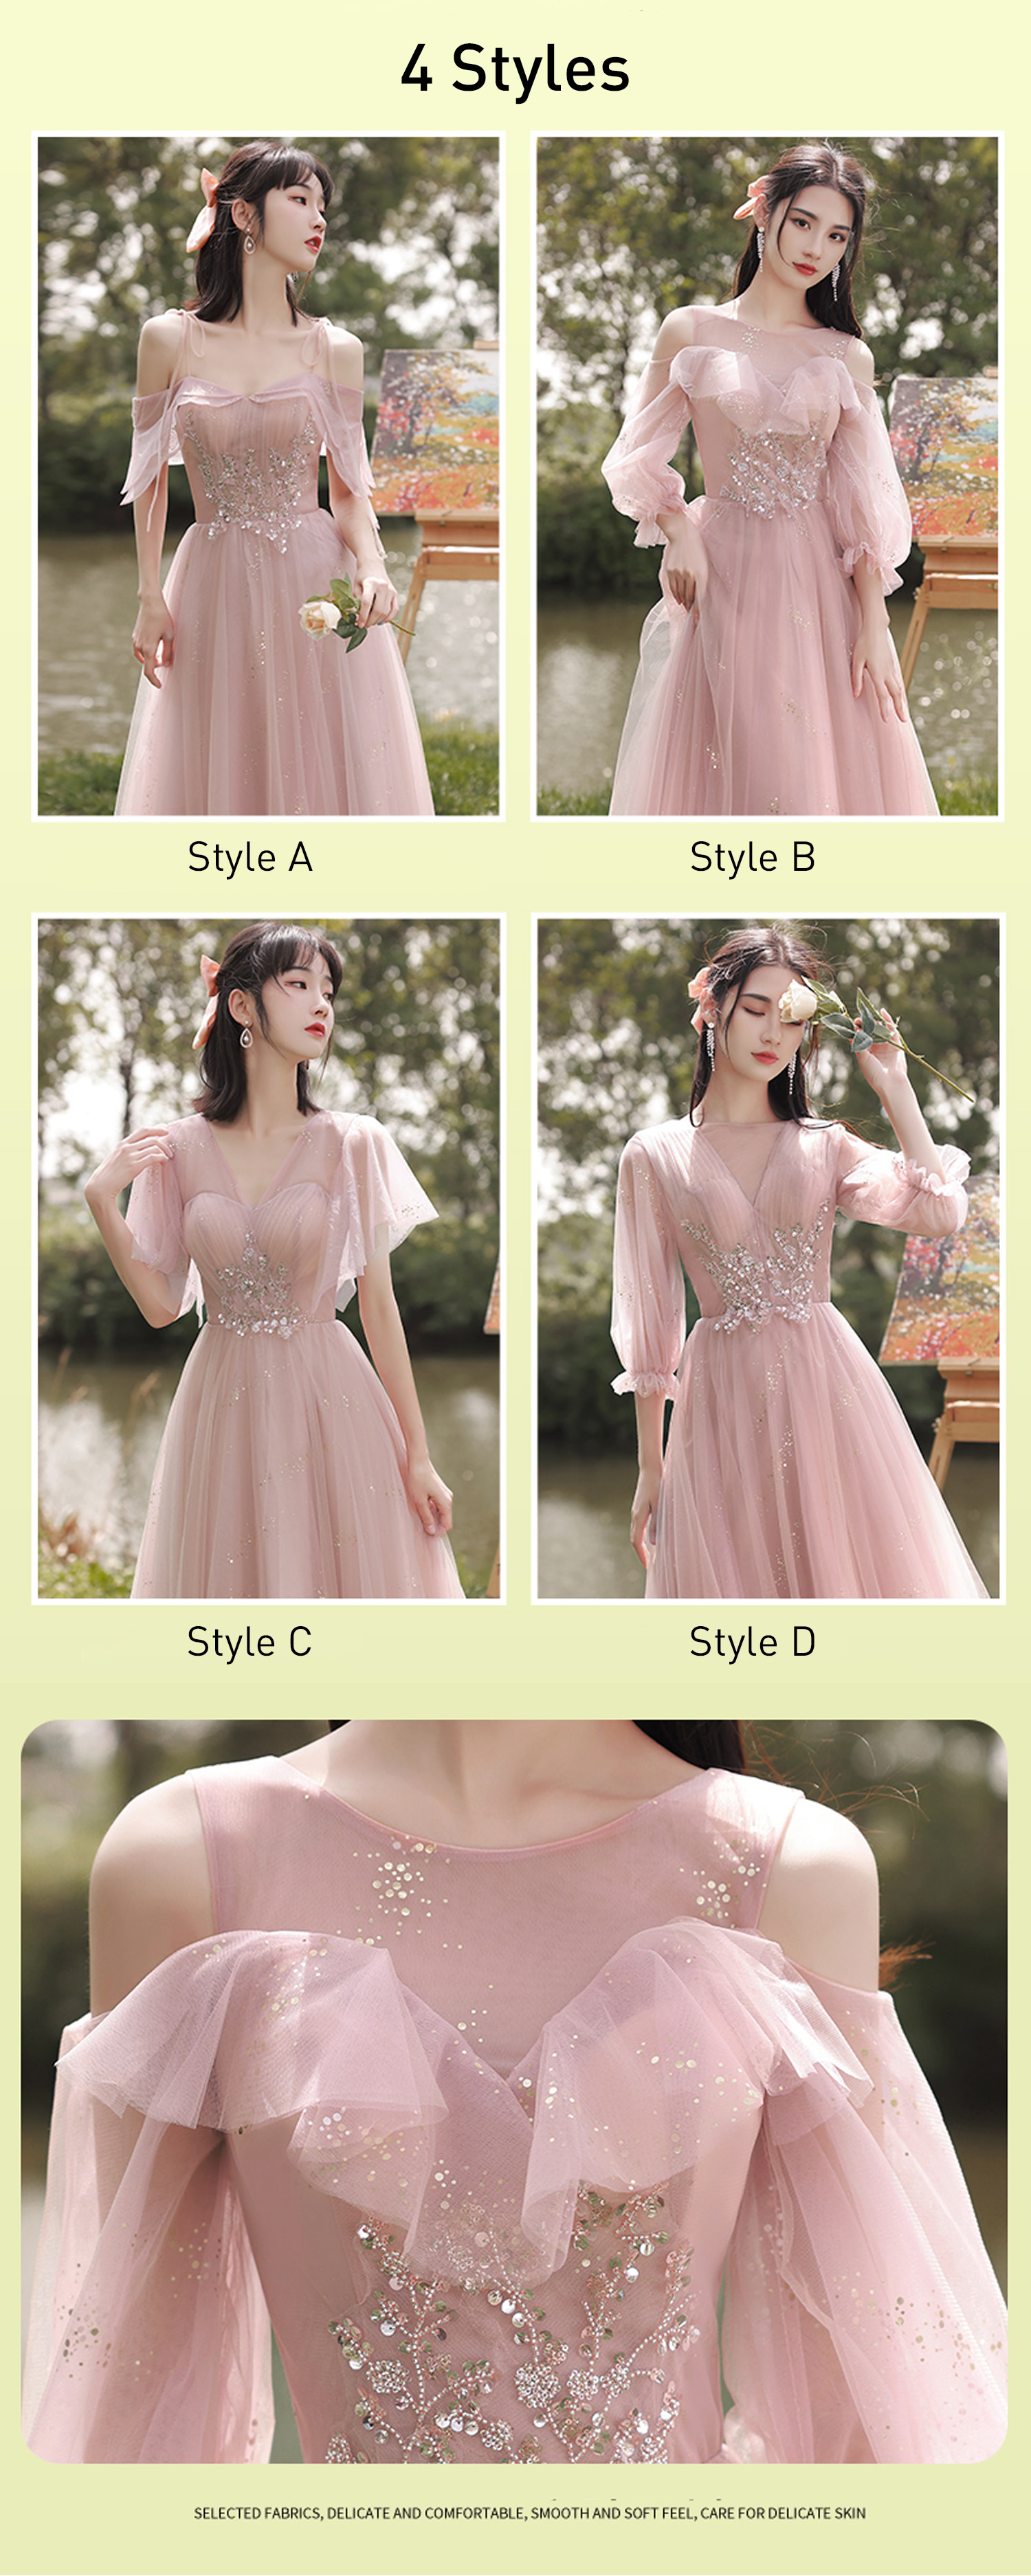 Romantic-Pink-Bridal-Party-Dress-Elegant-Occasions-Formal-Gown14.jpg